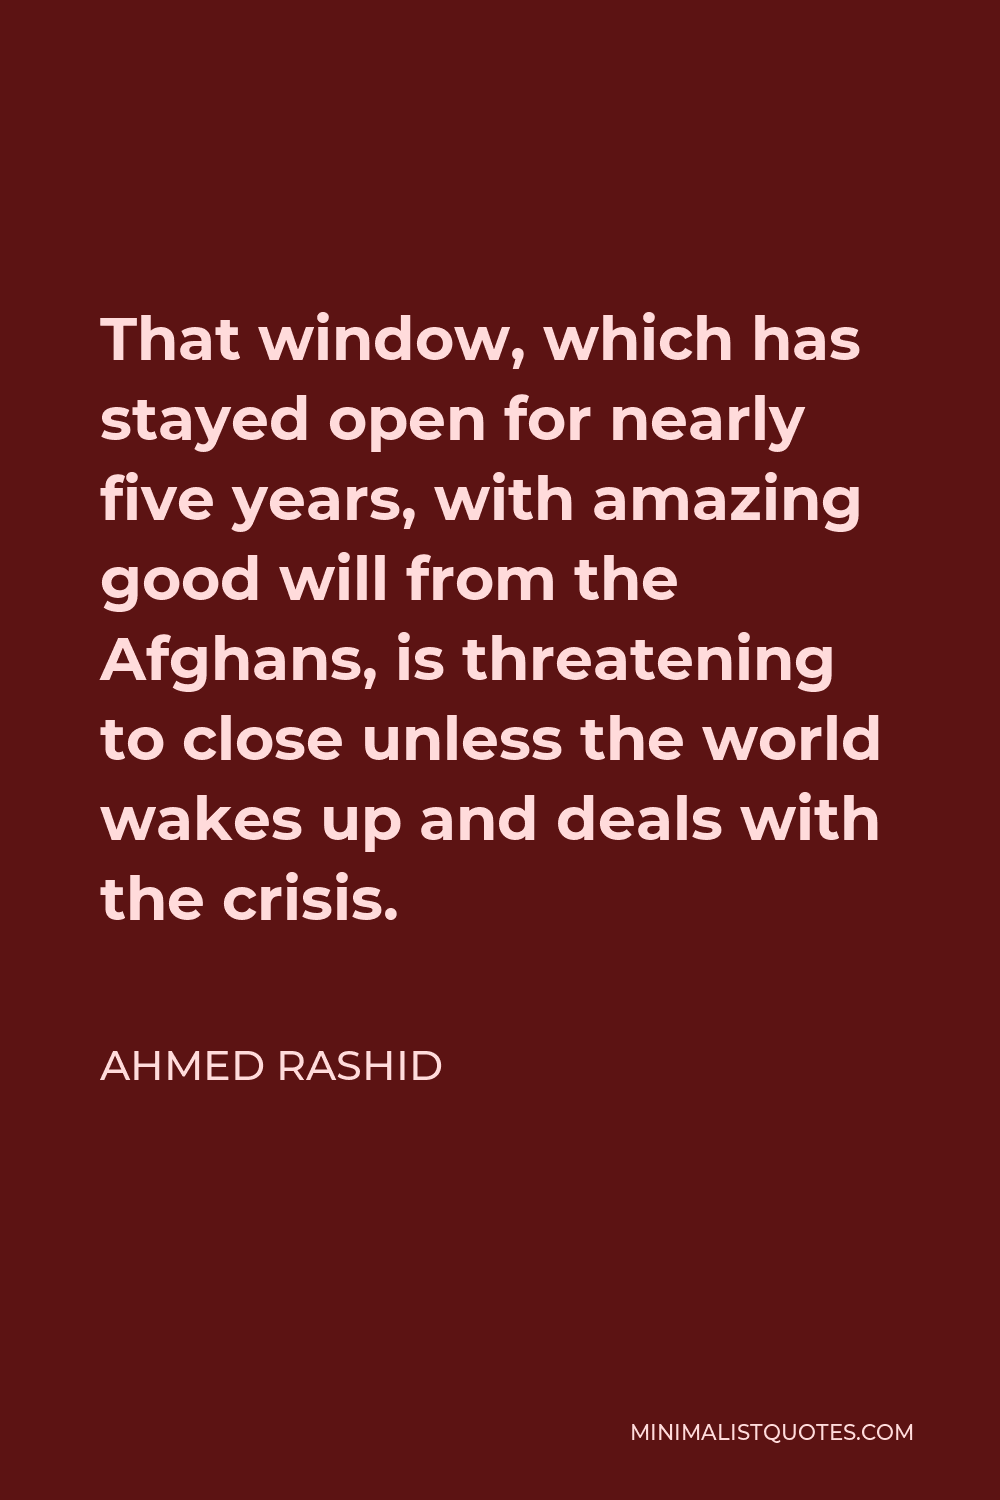 Ahmed Rashid Quote - That window, which has stayed open for nearly five years, with amazing good will from the Afghans, is threatening to close unless the world wakes up and deals with the crisis.